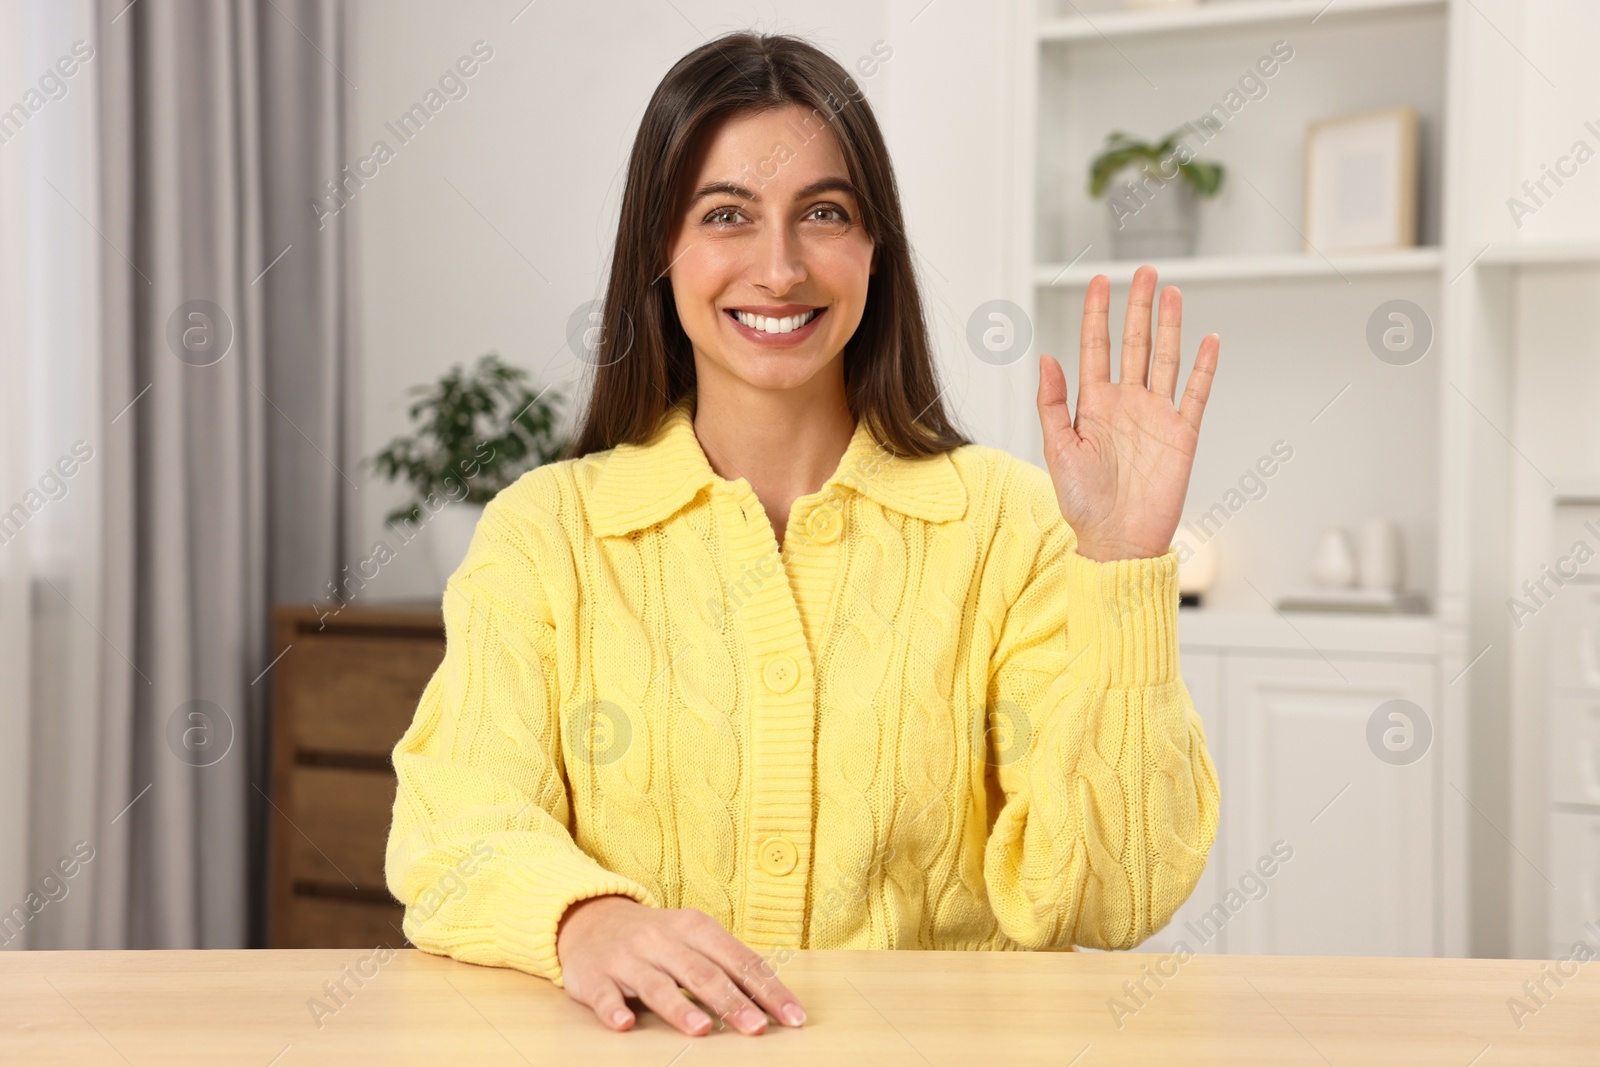 Photo of Happy woman waving hello at table indoors